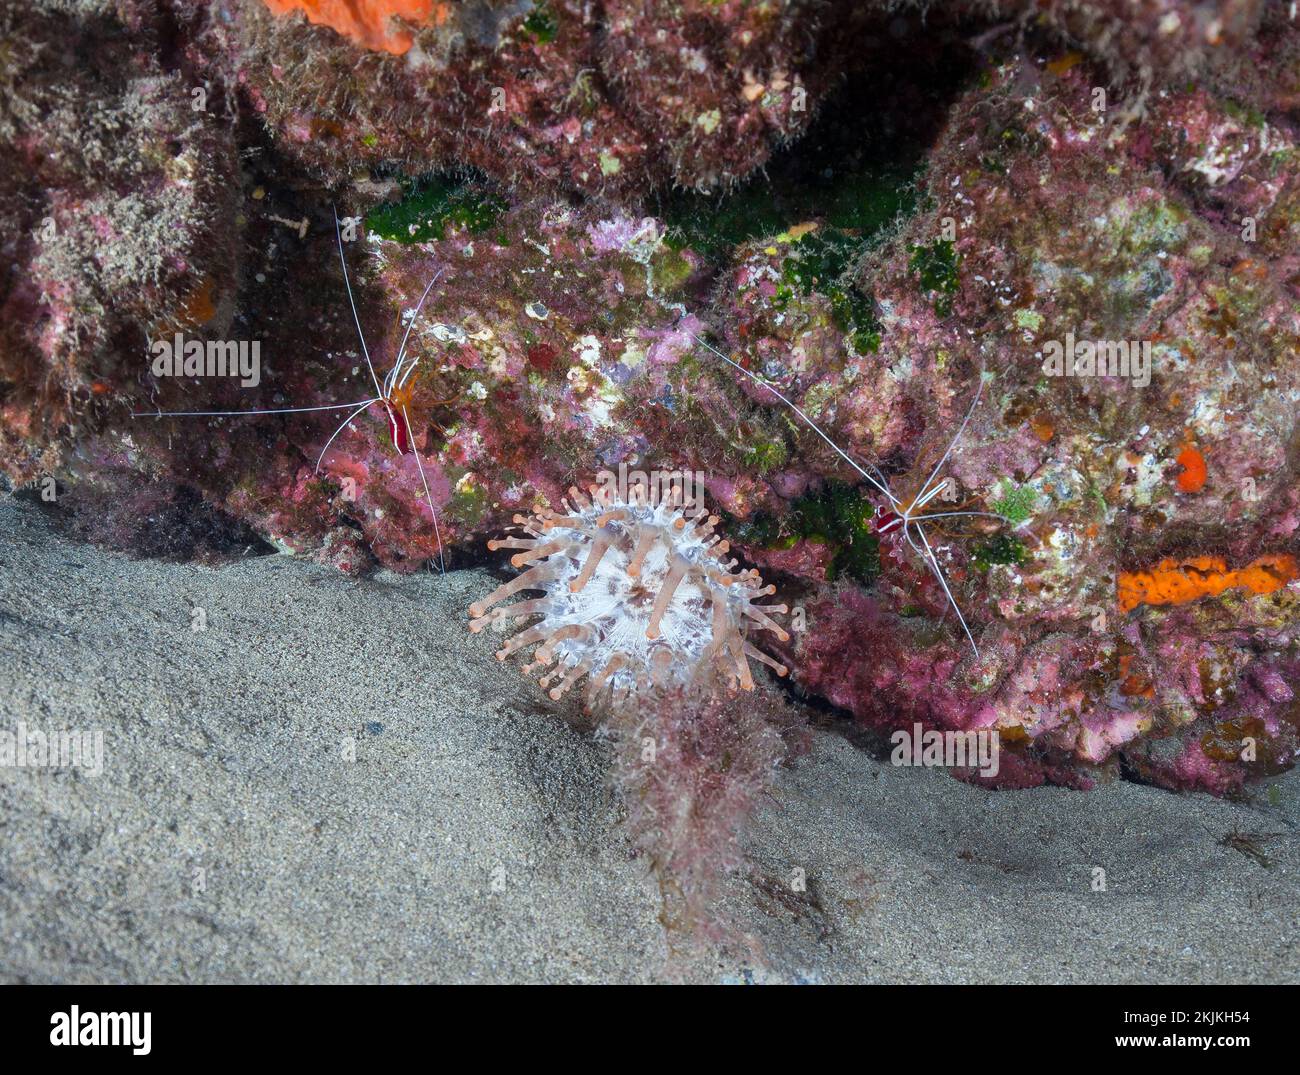 Club-tipped anemone (Telmatactis cricoides) with Atlantic white banded cleaner shrimp (Lysmata grabhami), Lanzarote. Canary Islands, Spain, Europe Stock Photo